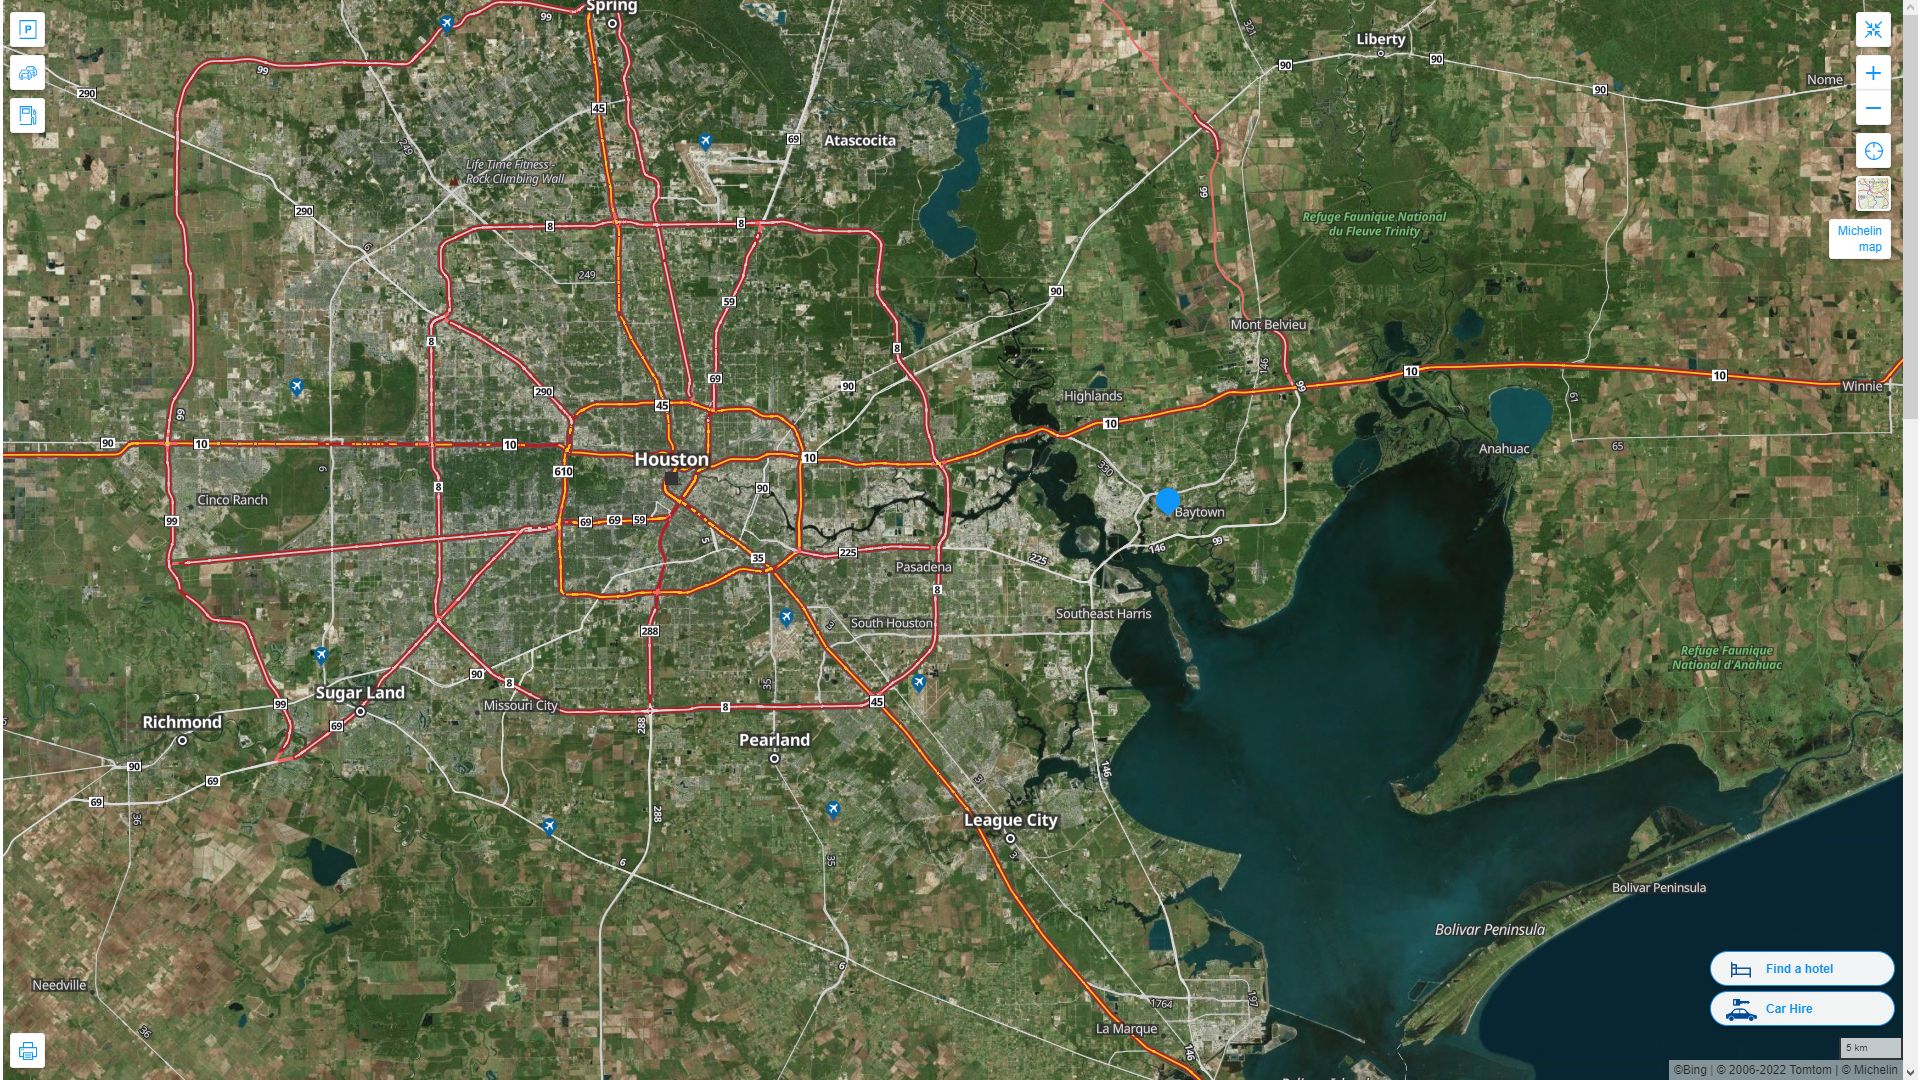 Baytown Texas Highway and Road Map with Satellite View